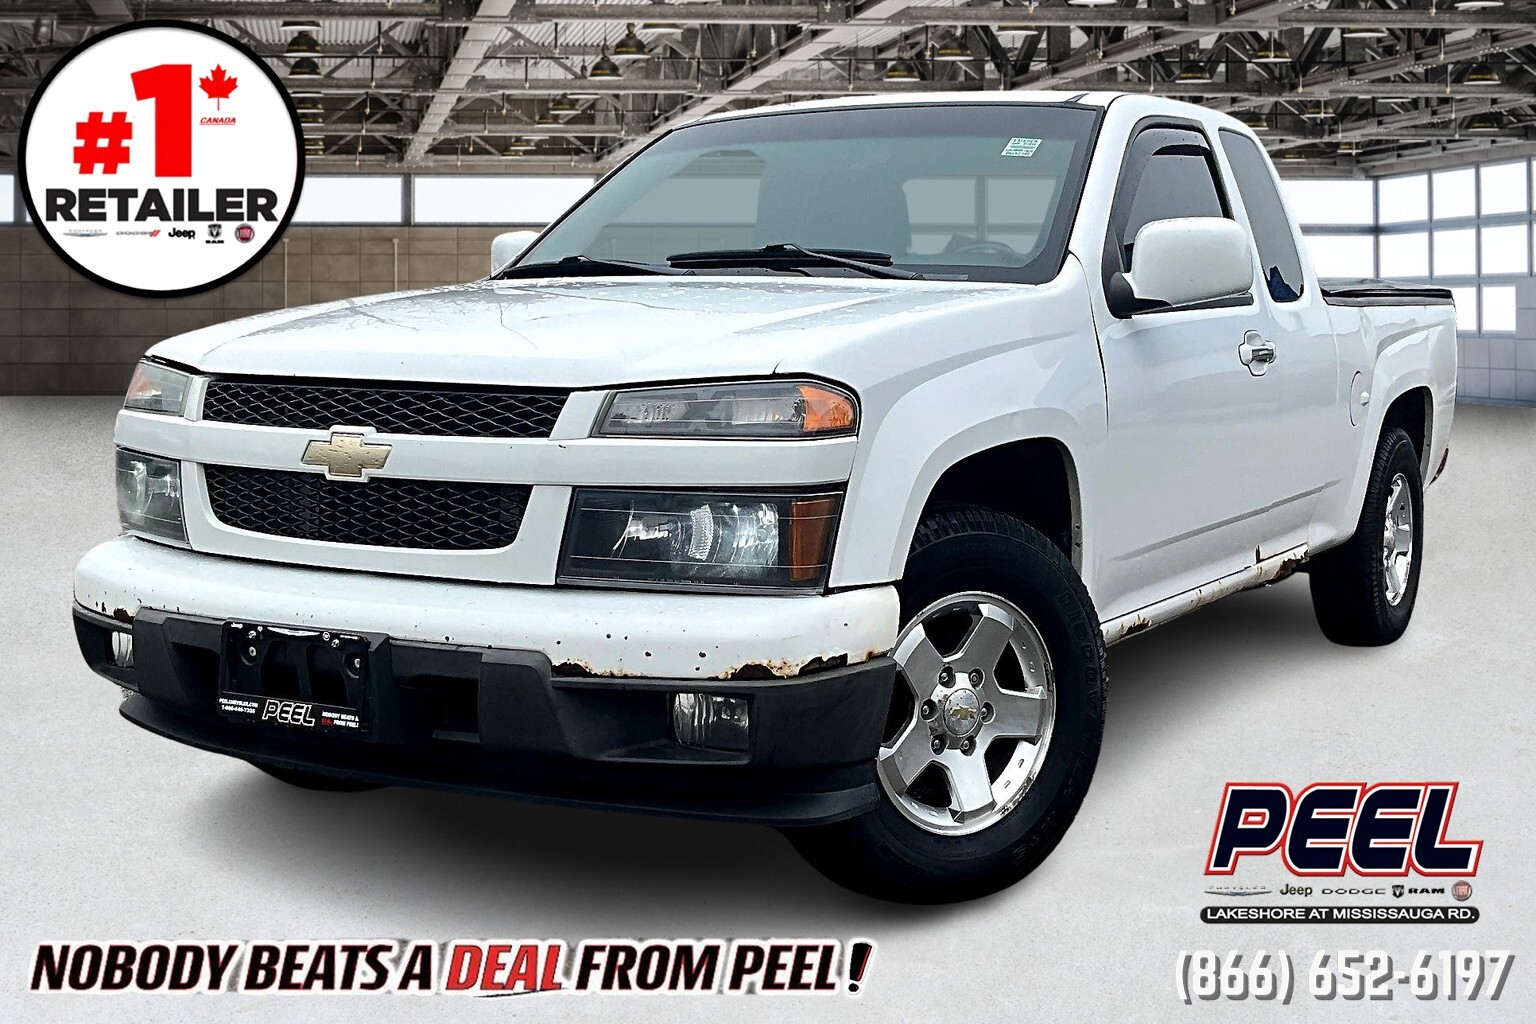 2011 Chevrolet Colorado Extended Cab | 5Spd Manual | AS IS | RWD